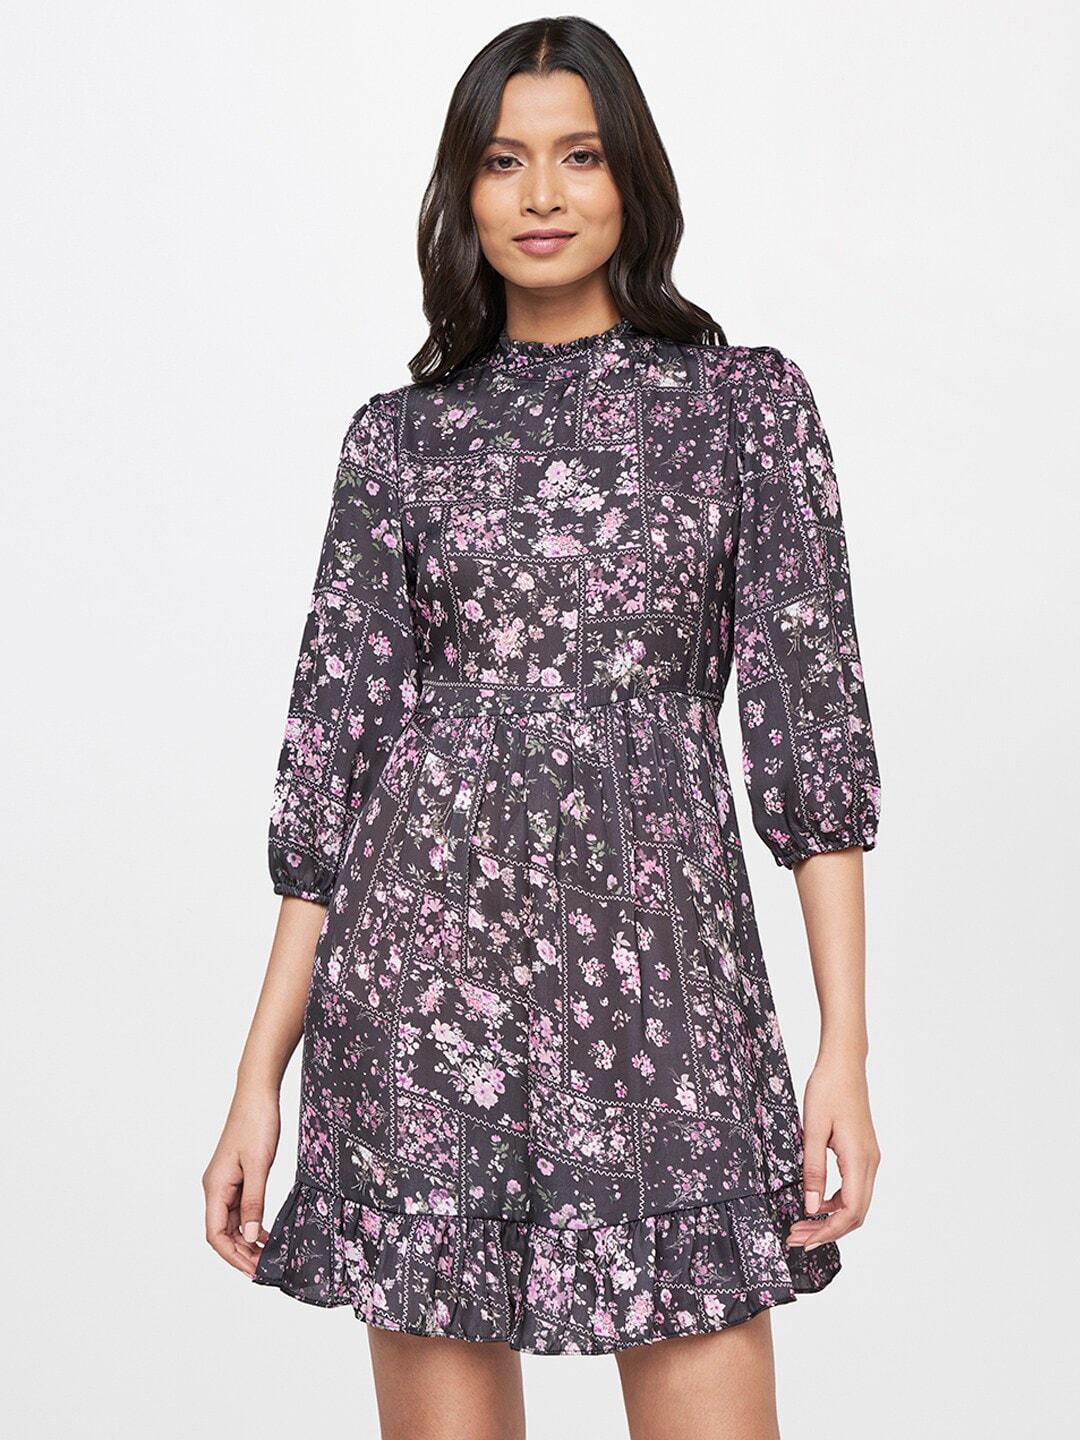 AND Women Purple & Pink Floral Fit & Flare Dress